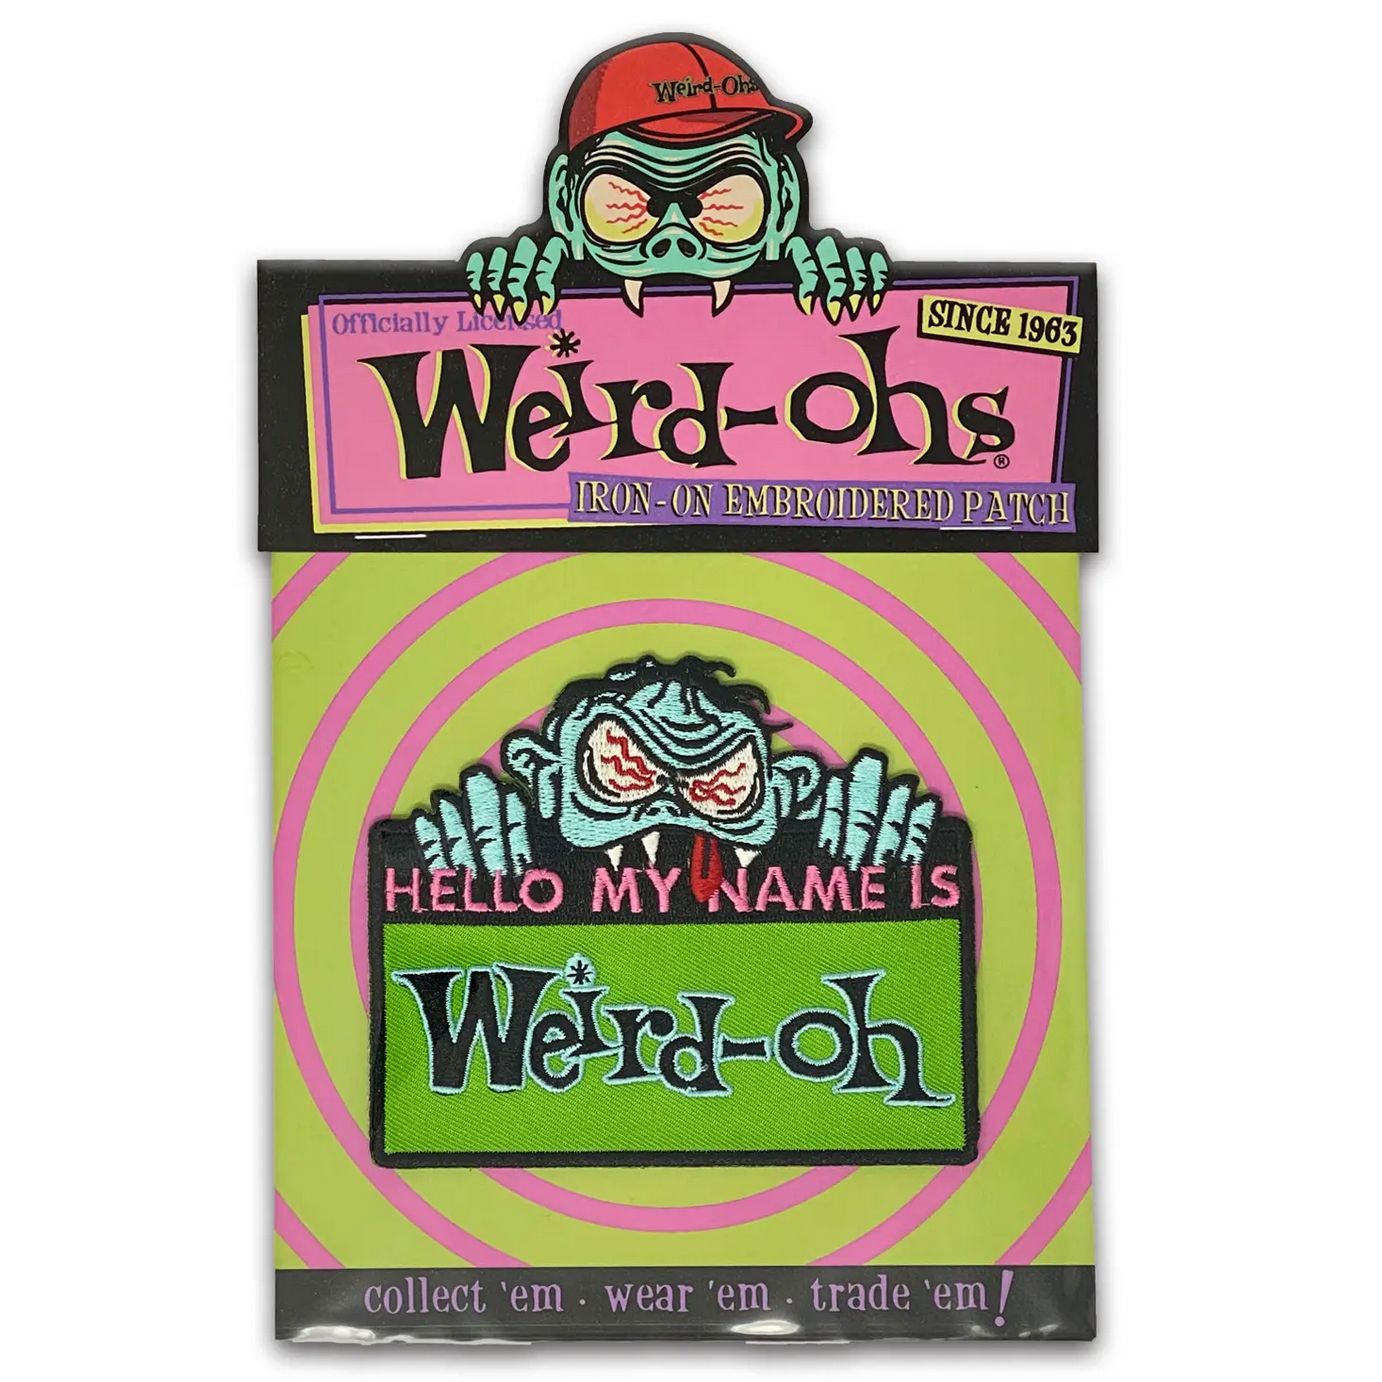 Weird-ohs My Name Is Patch